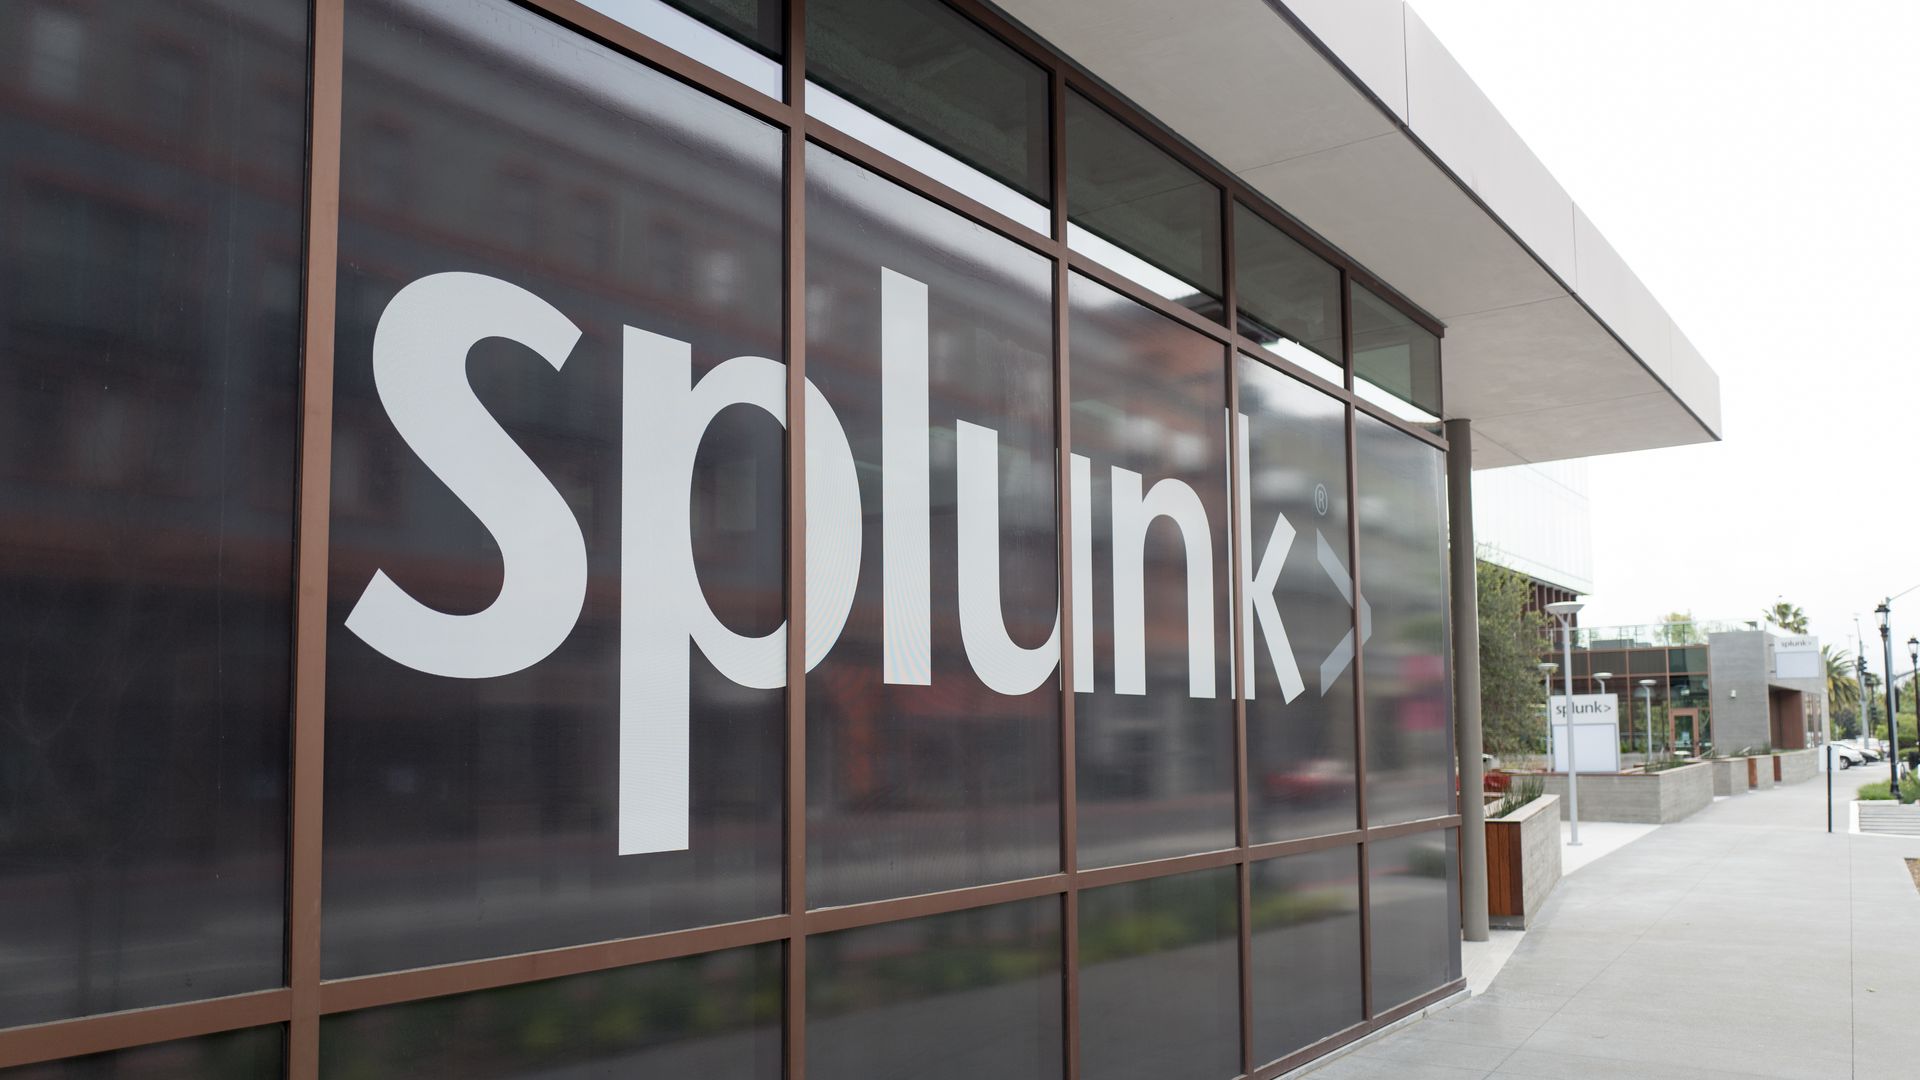 Image of the Splunk logo on an office building